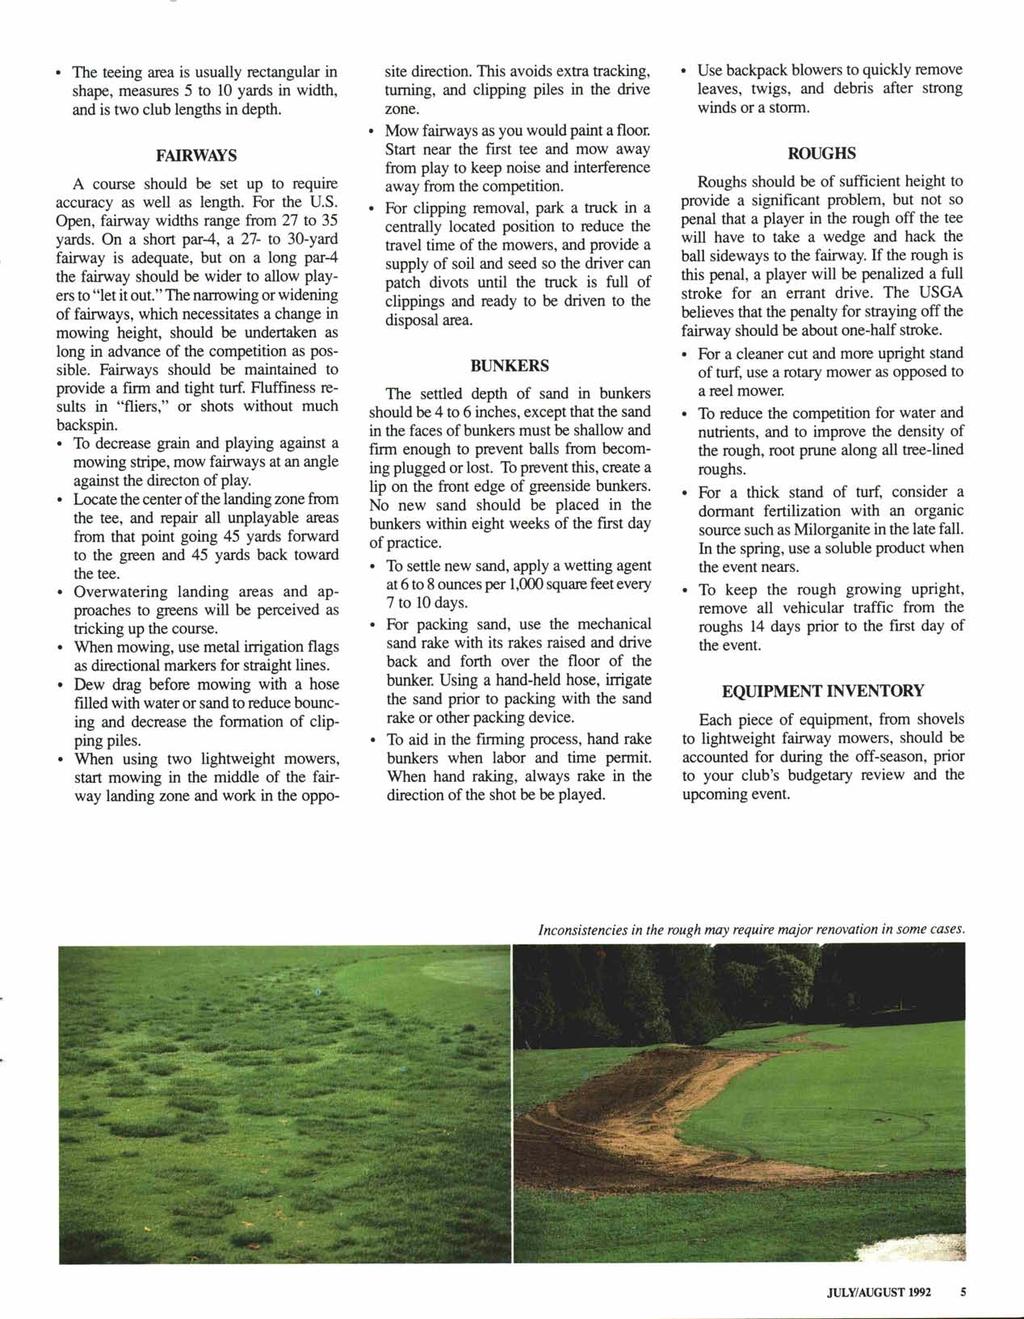 The teeing area is usually rectangular in shape, measures 5 to 10 yards in width, and is two club lengths in depth. FAIRWAYS A course should be set up to require accuracy as well as length. For the U.